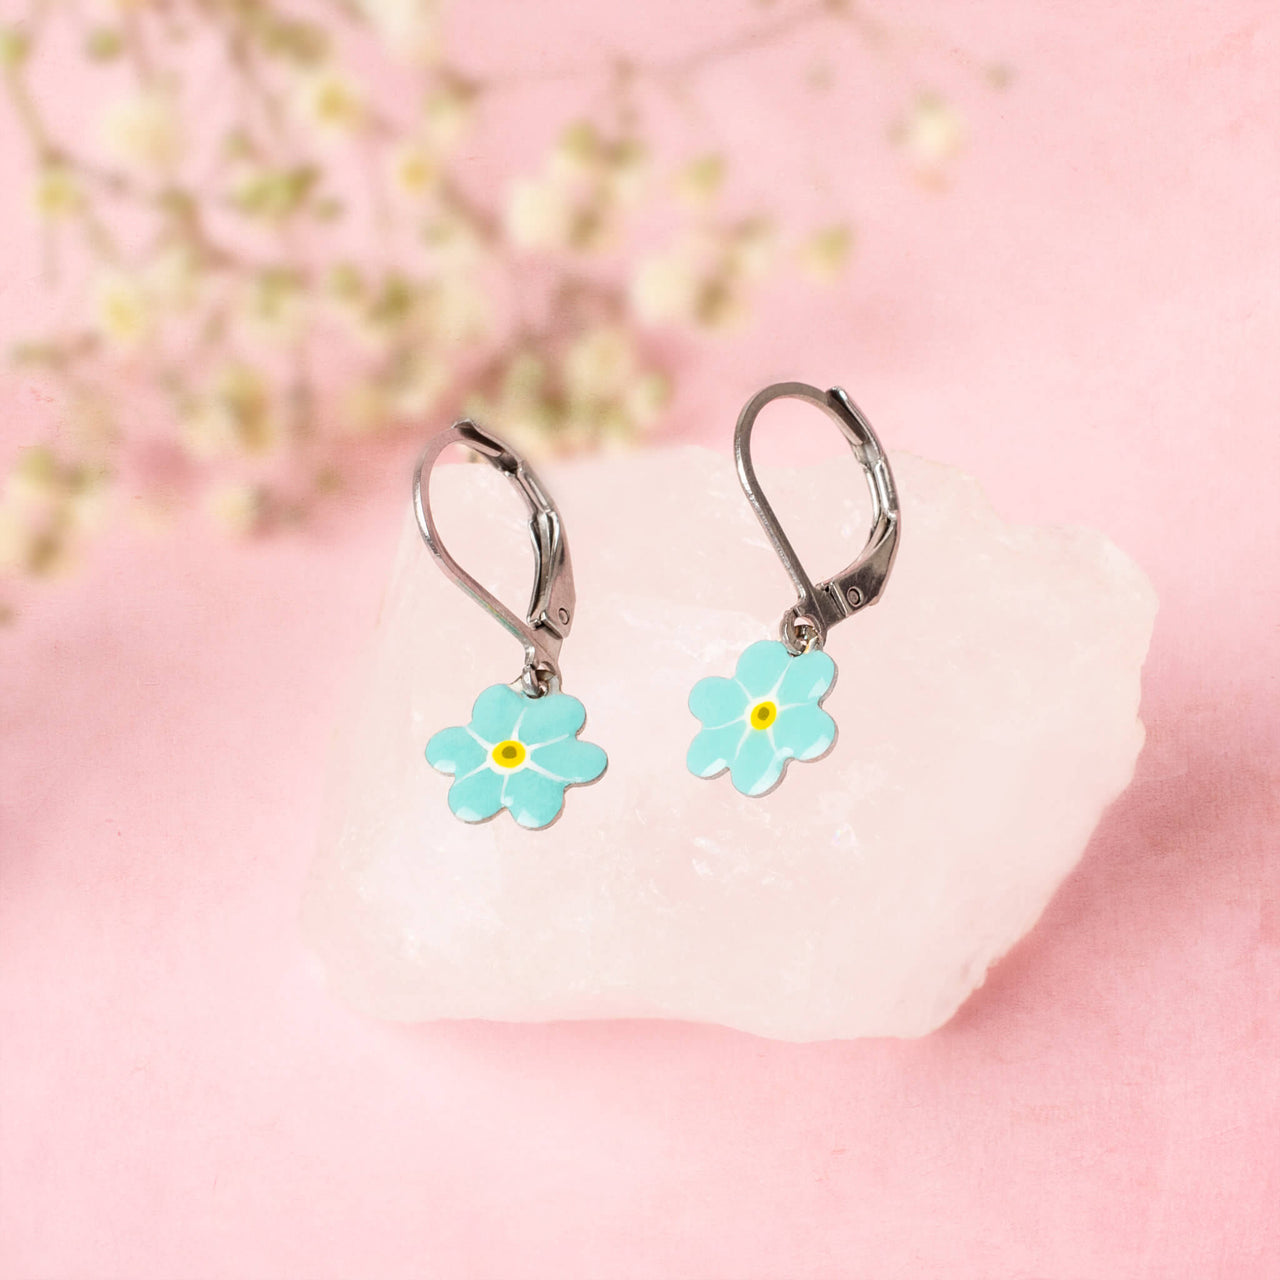 Forget-me-not Leverback Earrings